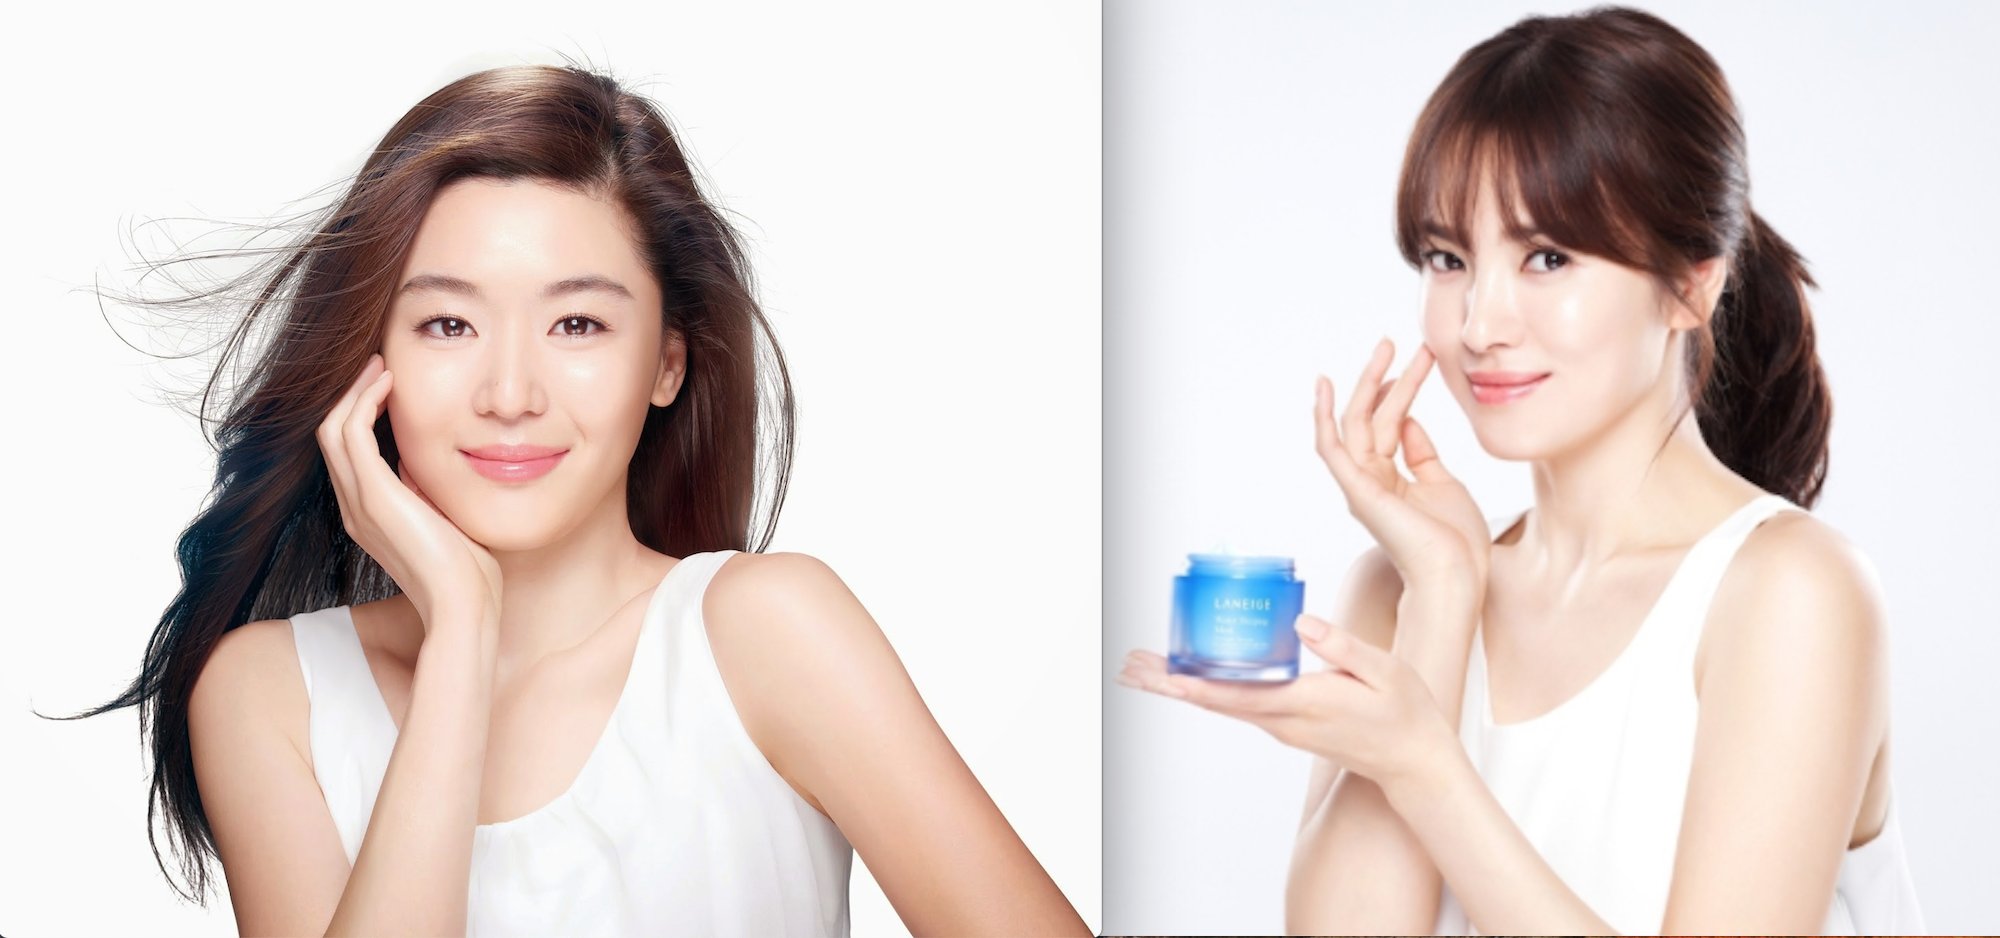 screen shot 2018 08 13 at 2 01 25 pm.png?resize=412,275 - 10 Rules of Skin Care That Help Korean Women Look So Young